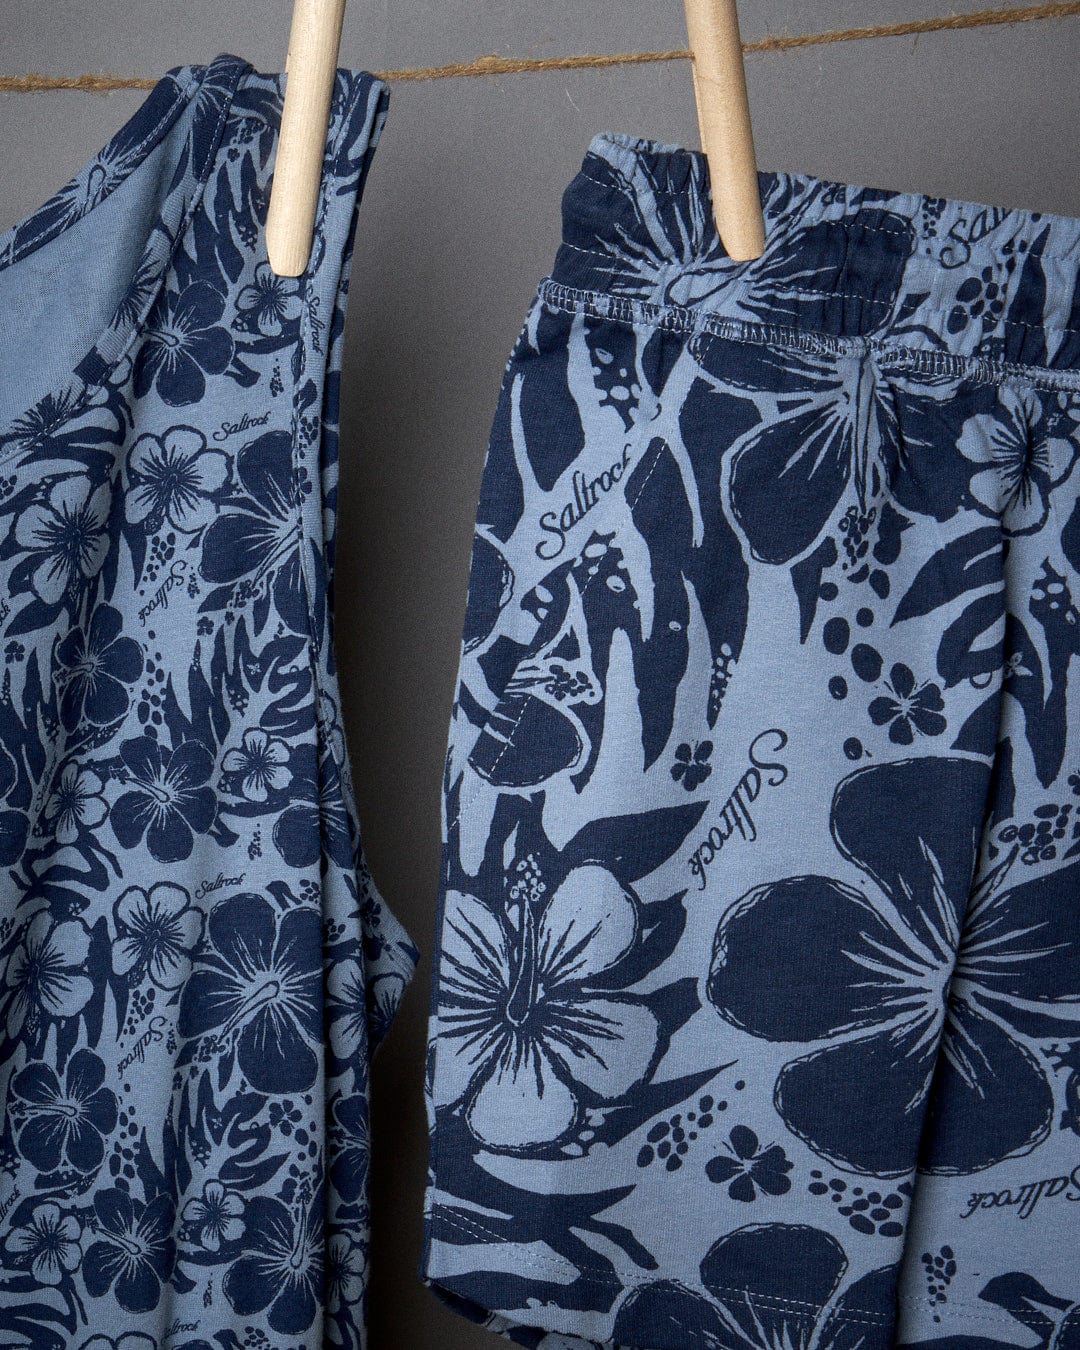 Two pairs of Saltrock branded swim shorts with a Hibiscus Bauhaus pattern hanging on wooden hangers against a gray background.